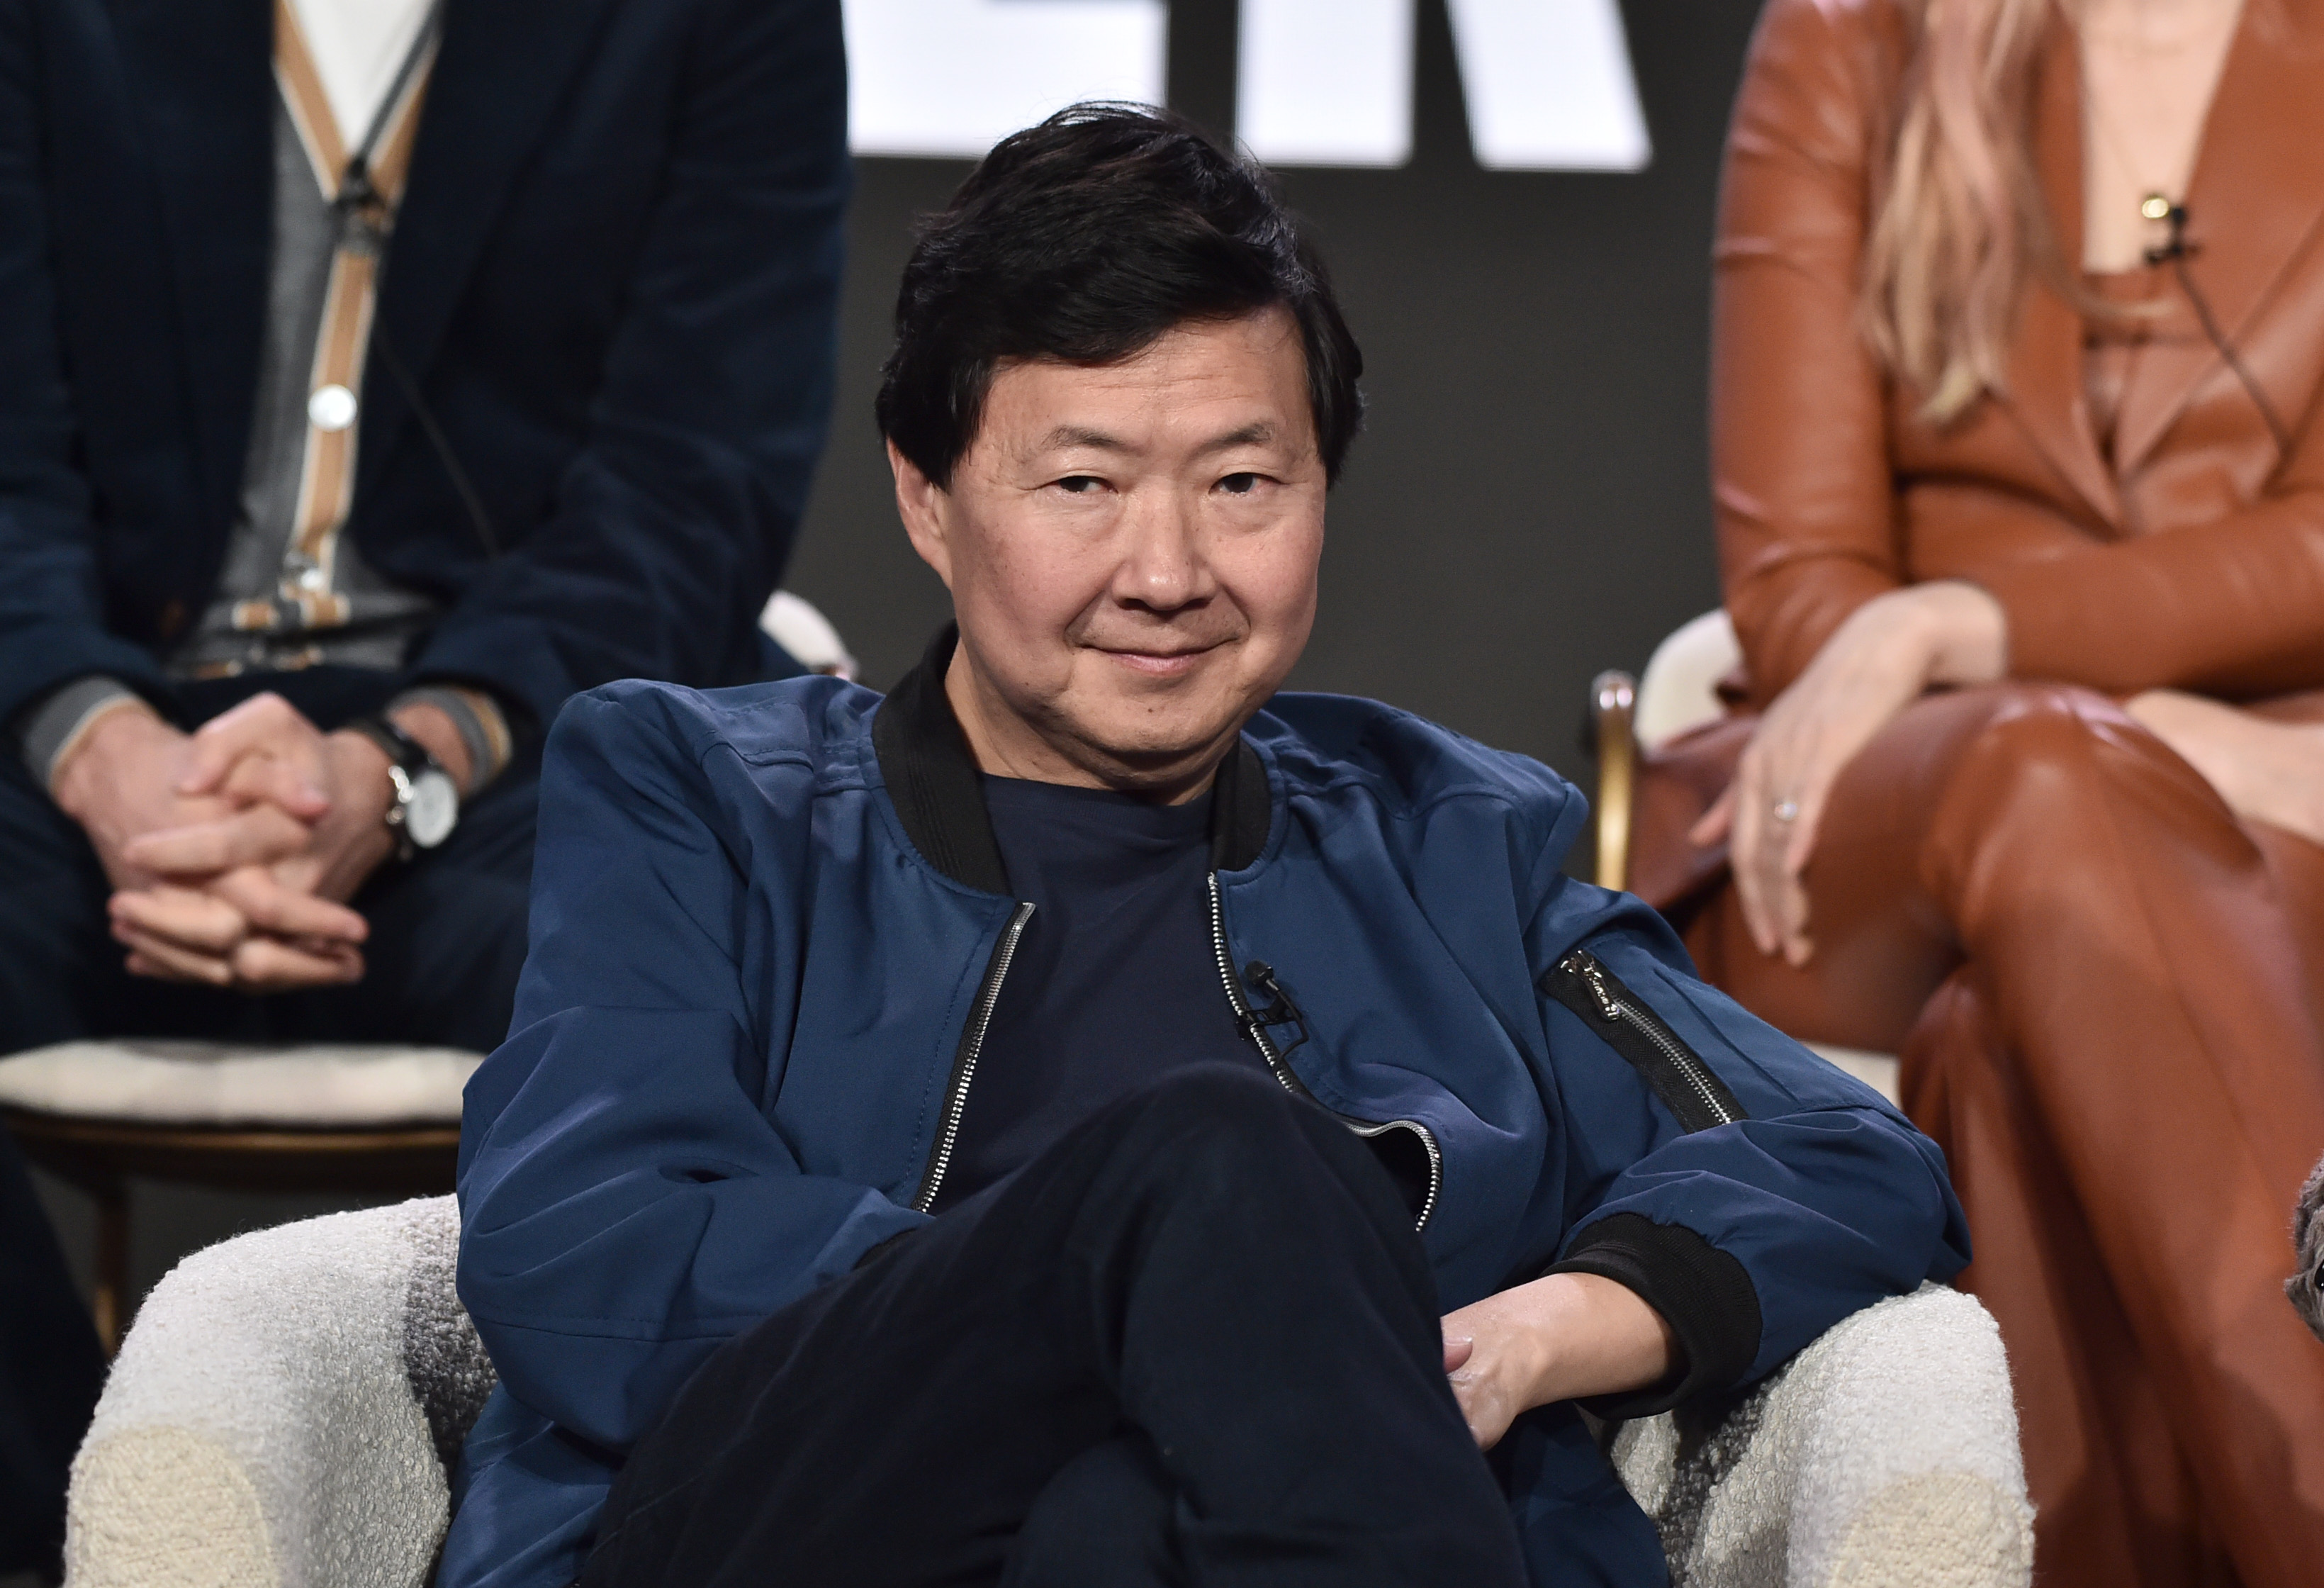 Ken Jeong attends the Apple TV+ 2023 TCA Winter Press Tour at The Langham on January 18, 2023, in Pasadena, California. | Source: Getty Images